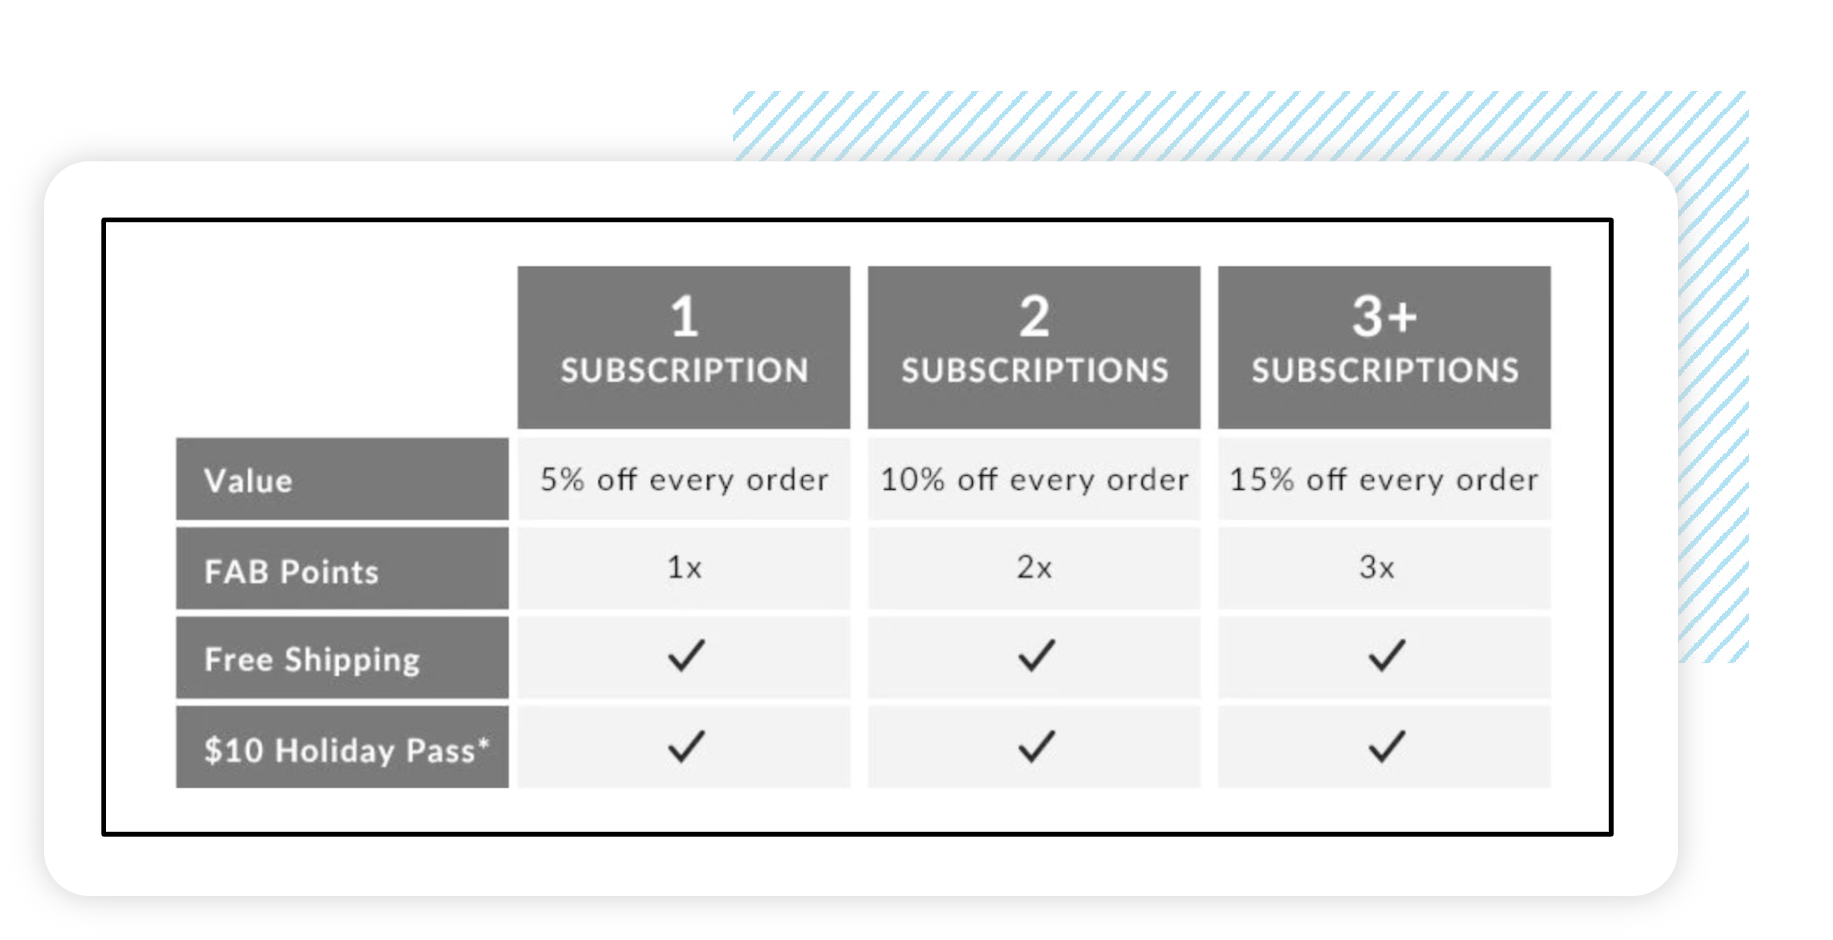 bareMinerals offers additional loyalty points based on the number of active subscriptions.